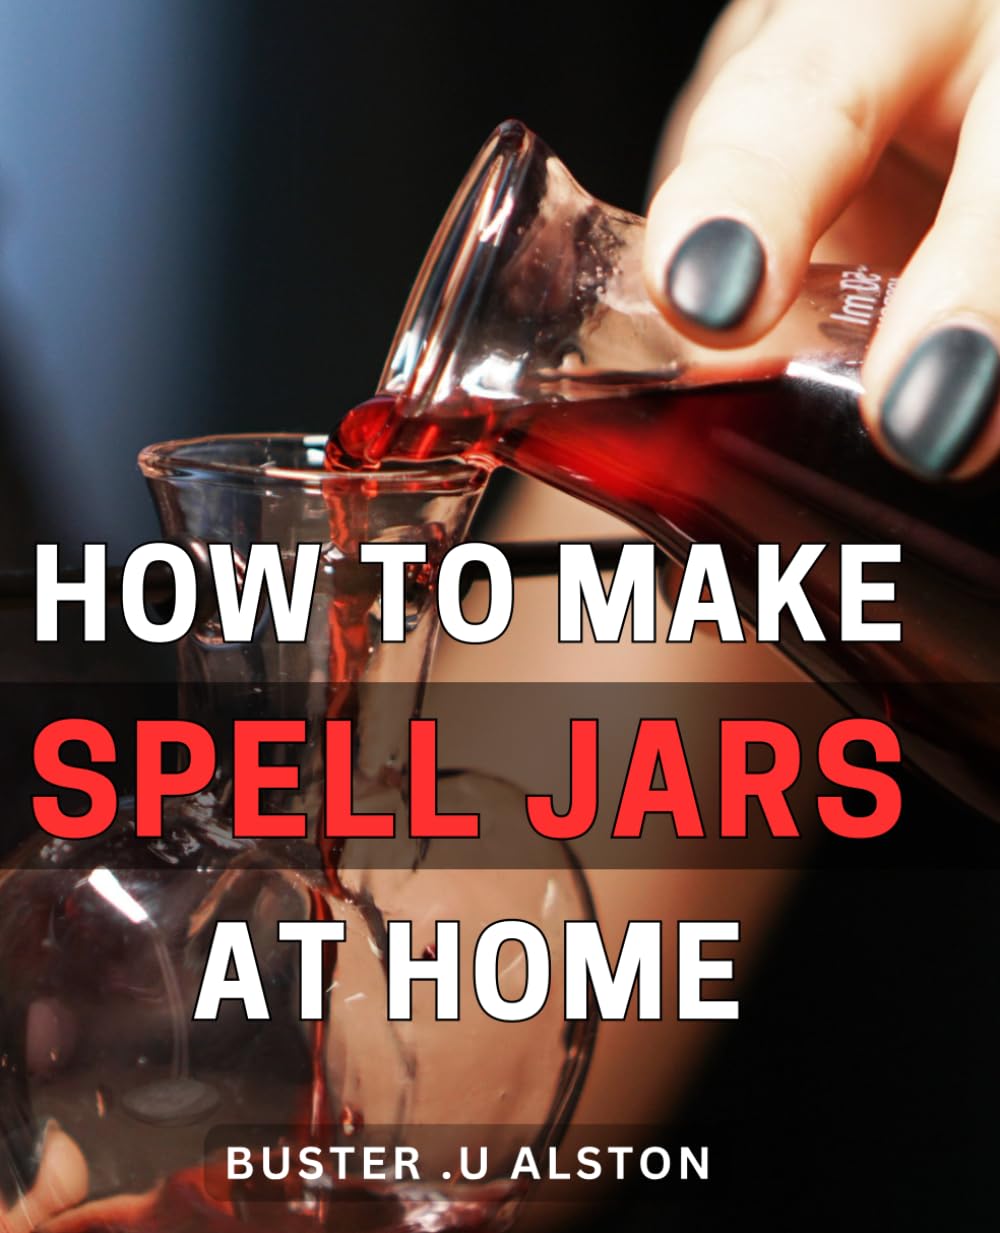 How To Make Spell Jars At Home: The Ultimate Guide To Crafting Powerful Spell Jars: Perfect Gift For Witches, Wiccans And Anyone Interested In Magick